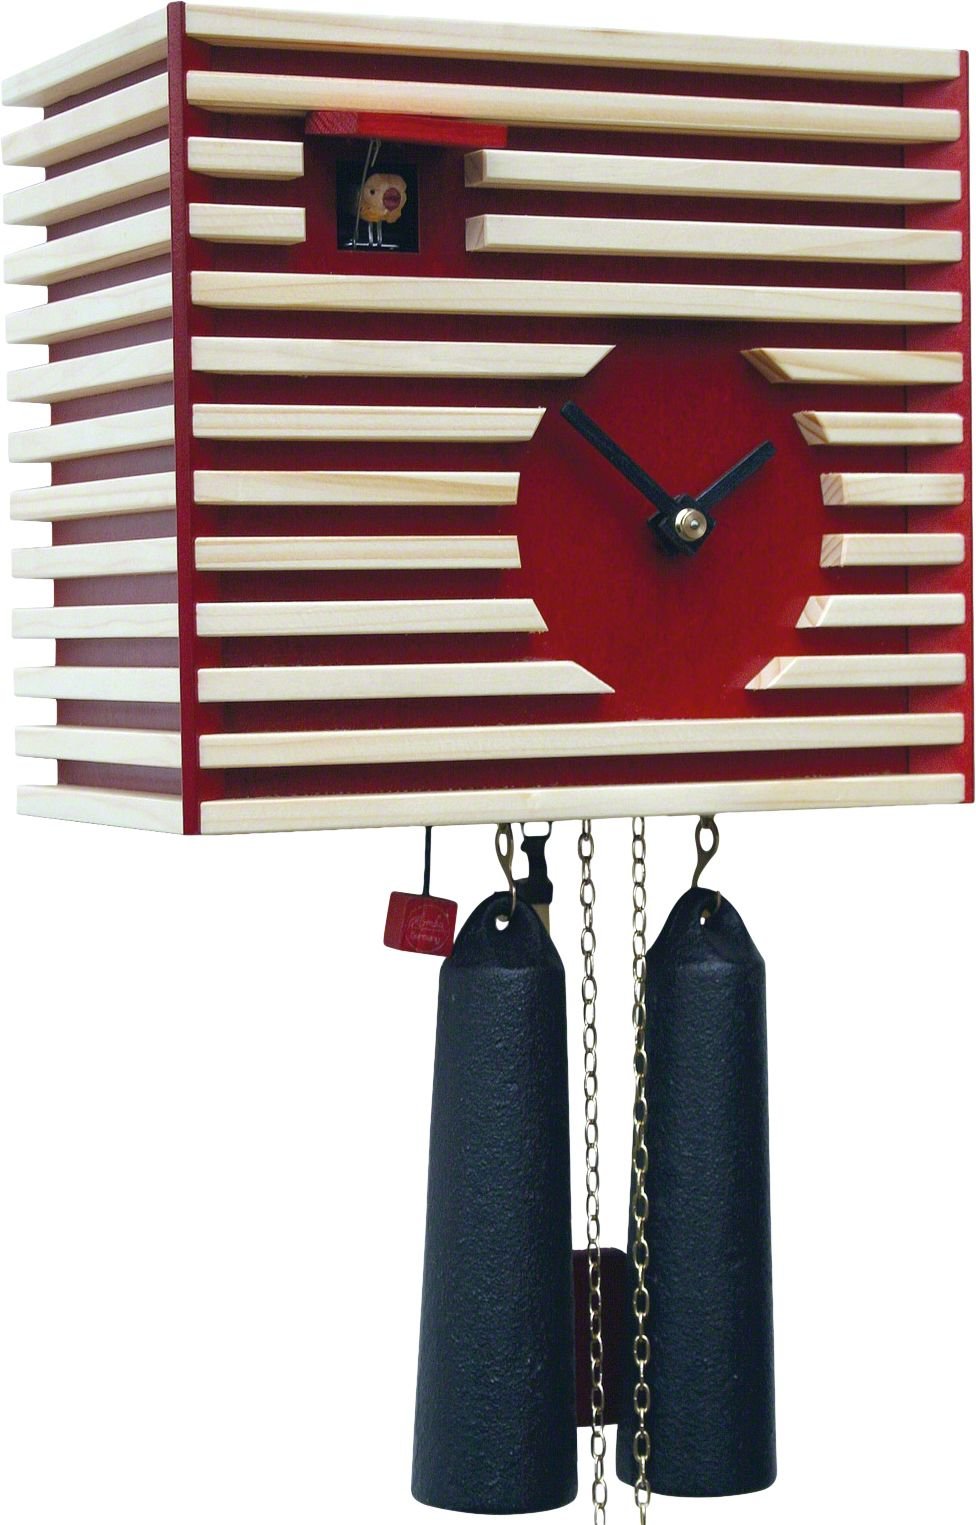 Cuckoo Clock Modern Art Style 8 Day Movement 20cm by Rombach & Haas